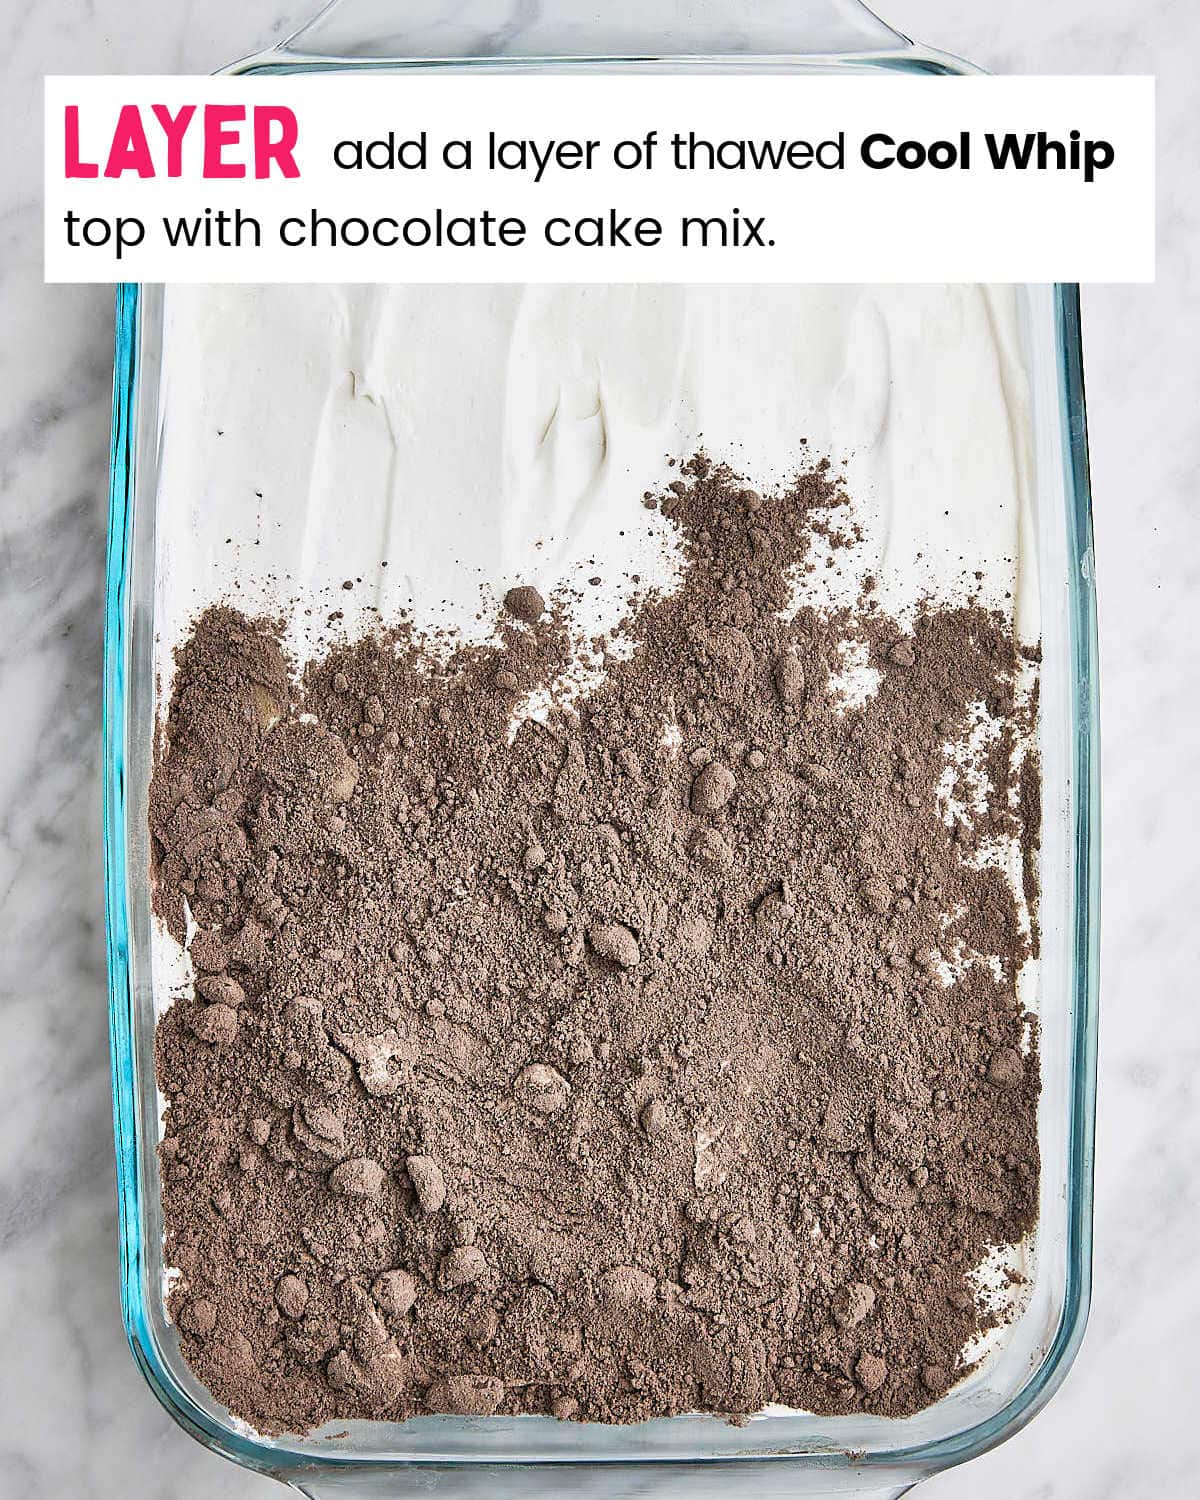 Process Step: Spread whipped topping over oreos and top with chocolate cake mix.